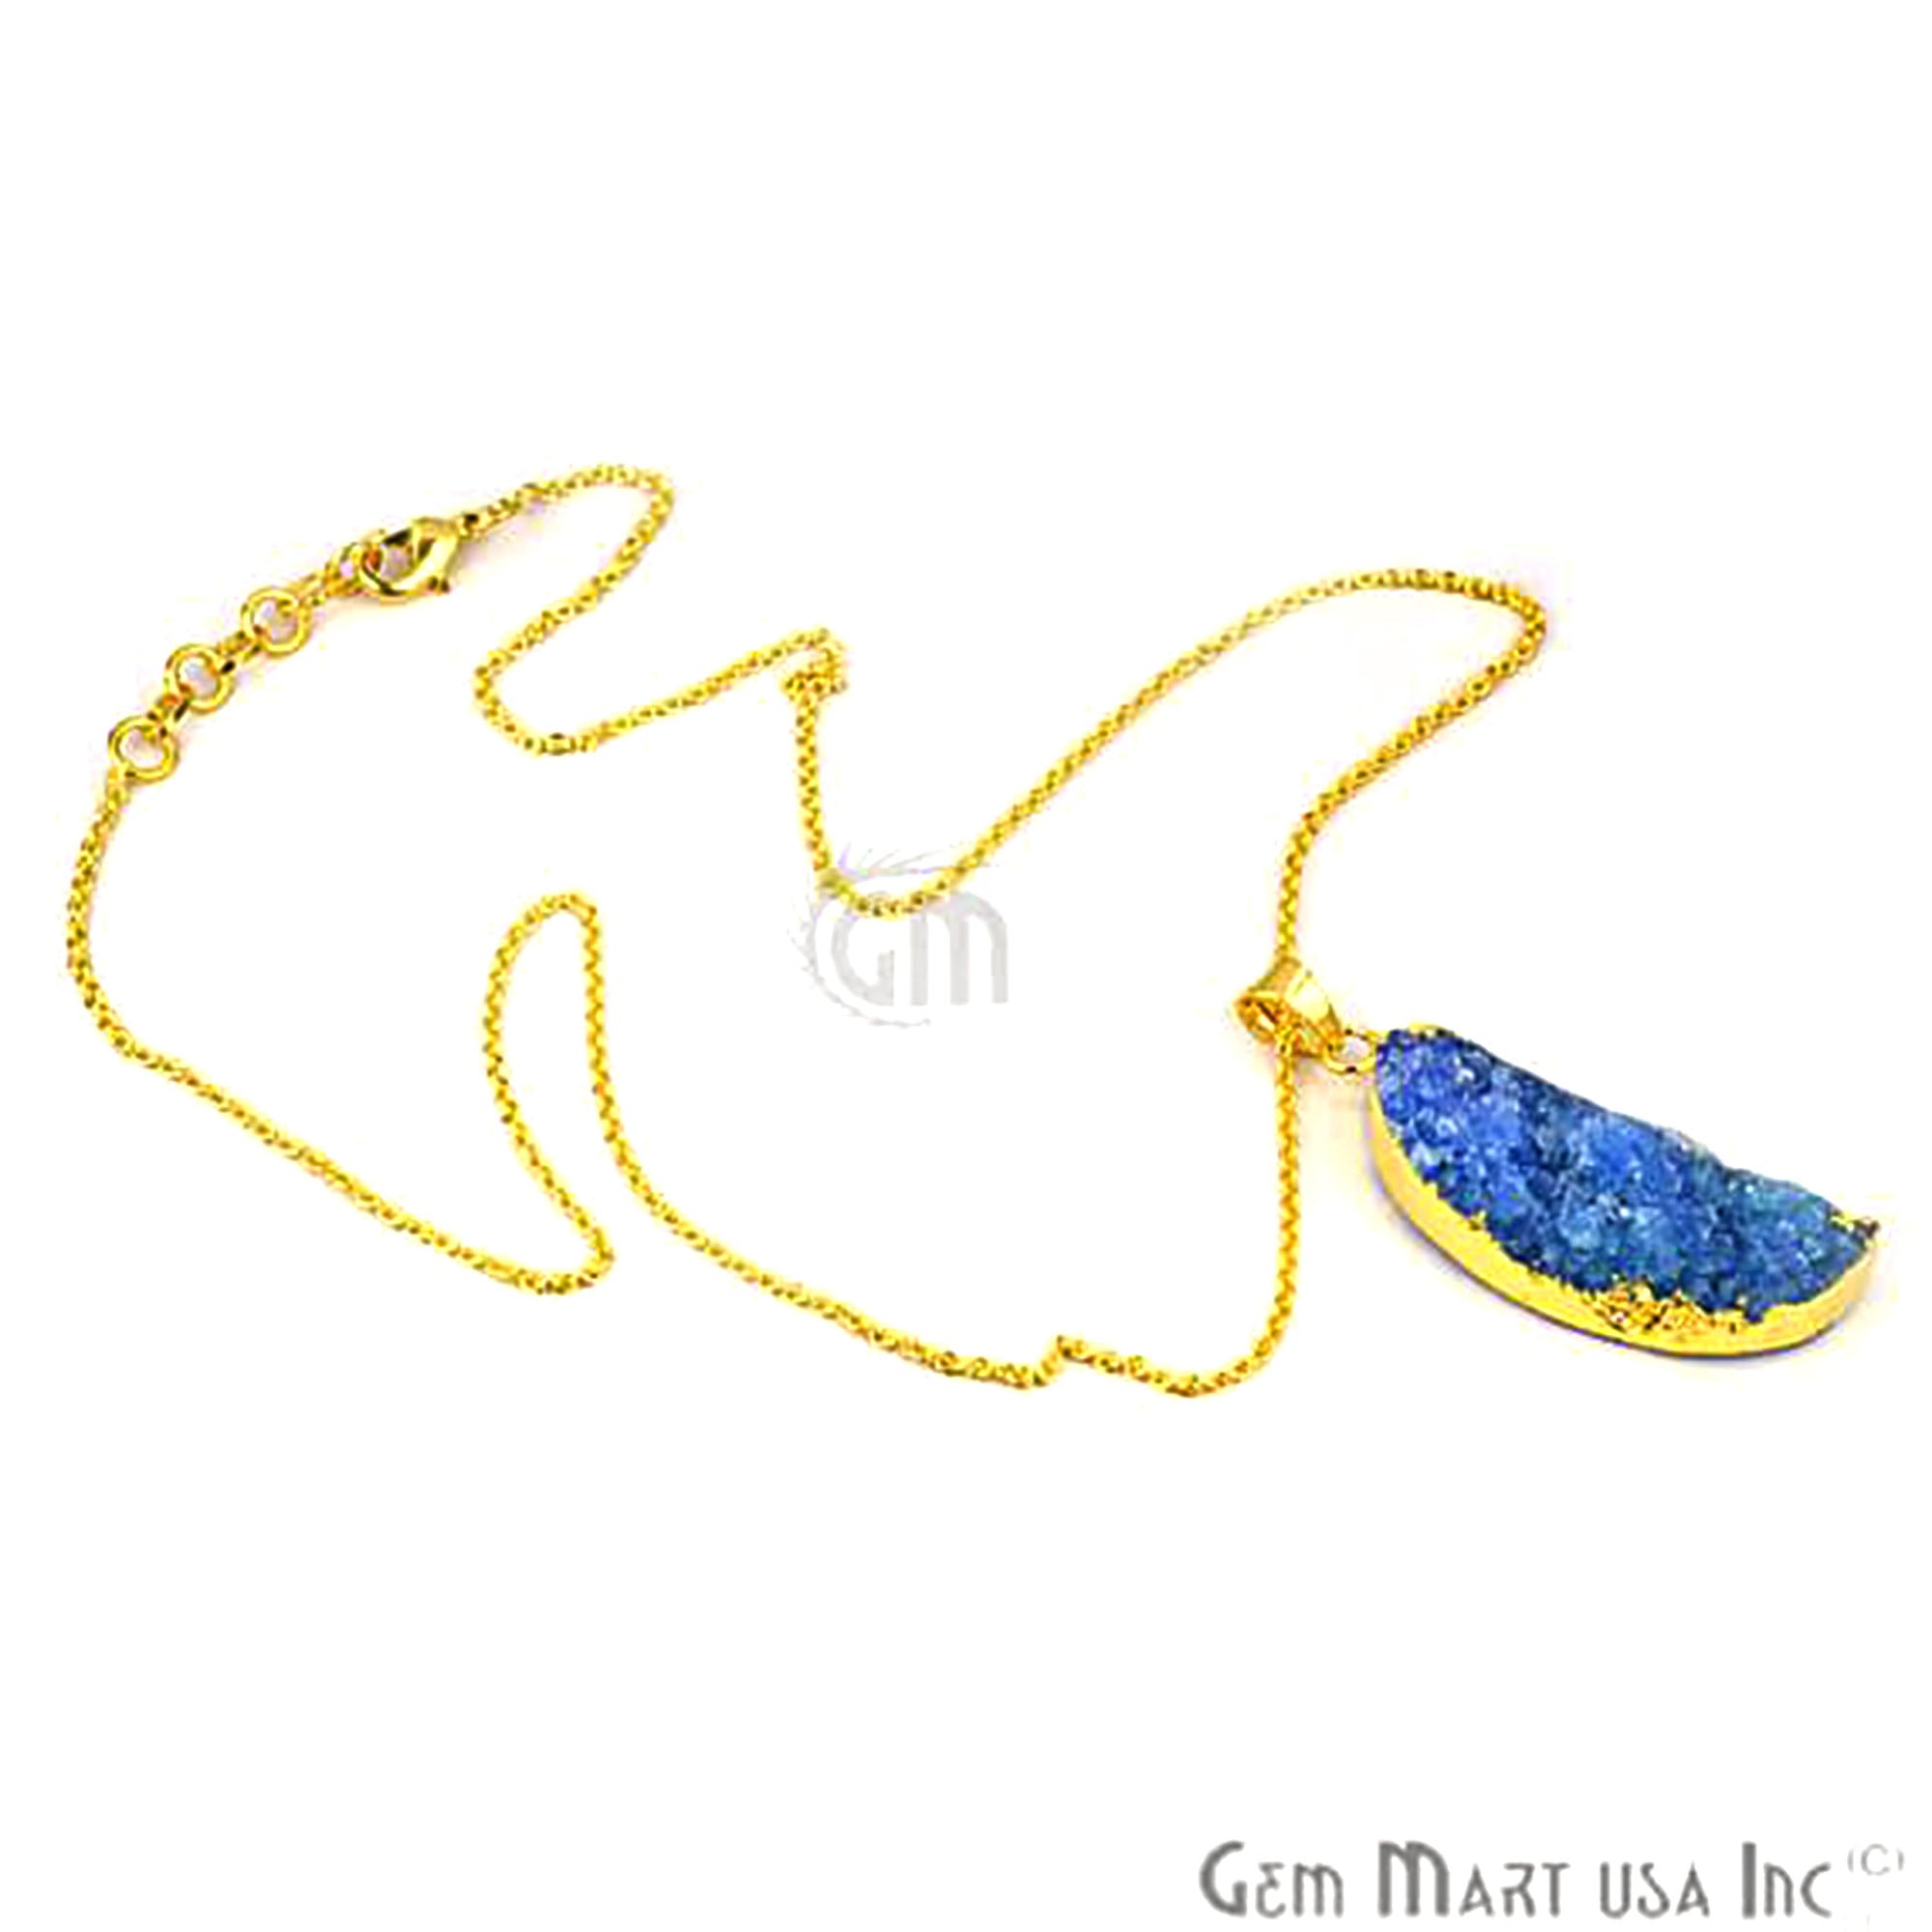 One Of A Kind Blue Rough Druzy 45x15mm Gold Electroplated 18 Inch Chain With Pendant - GemMartUSA